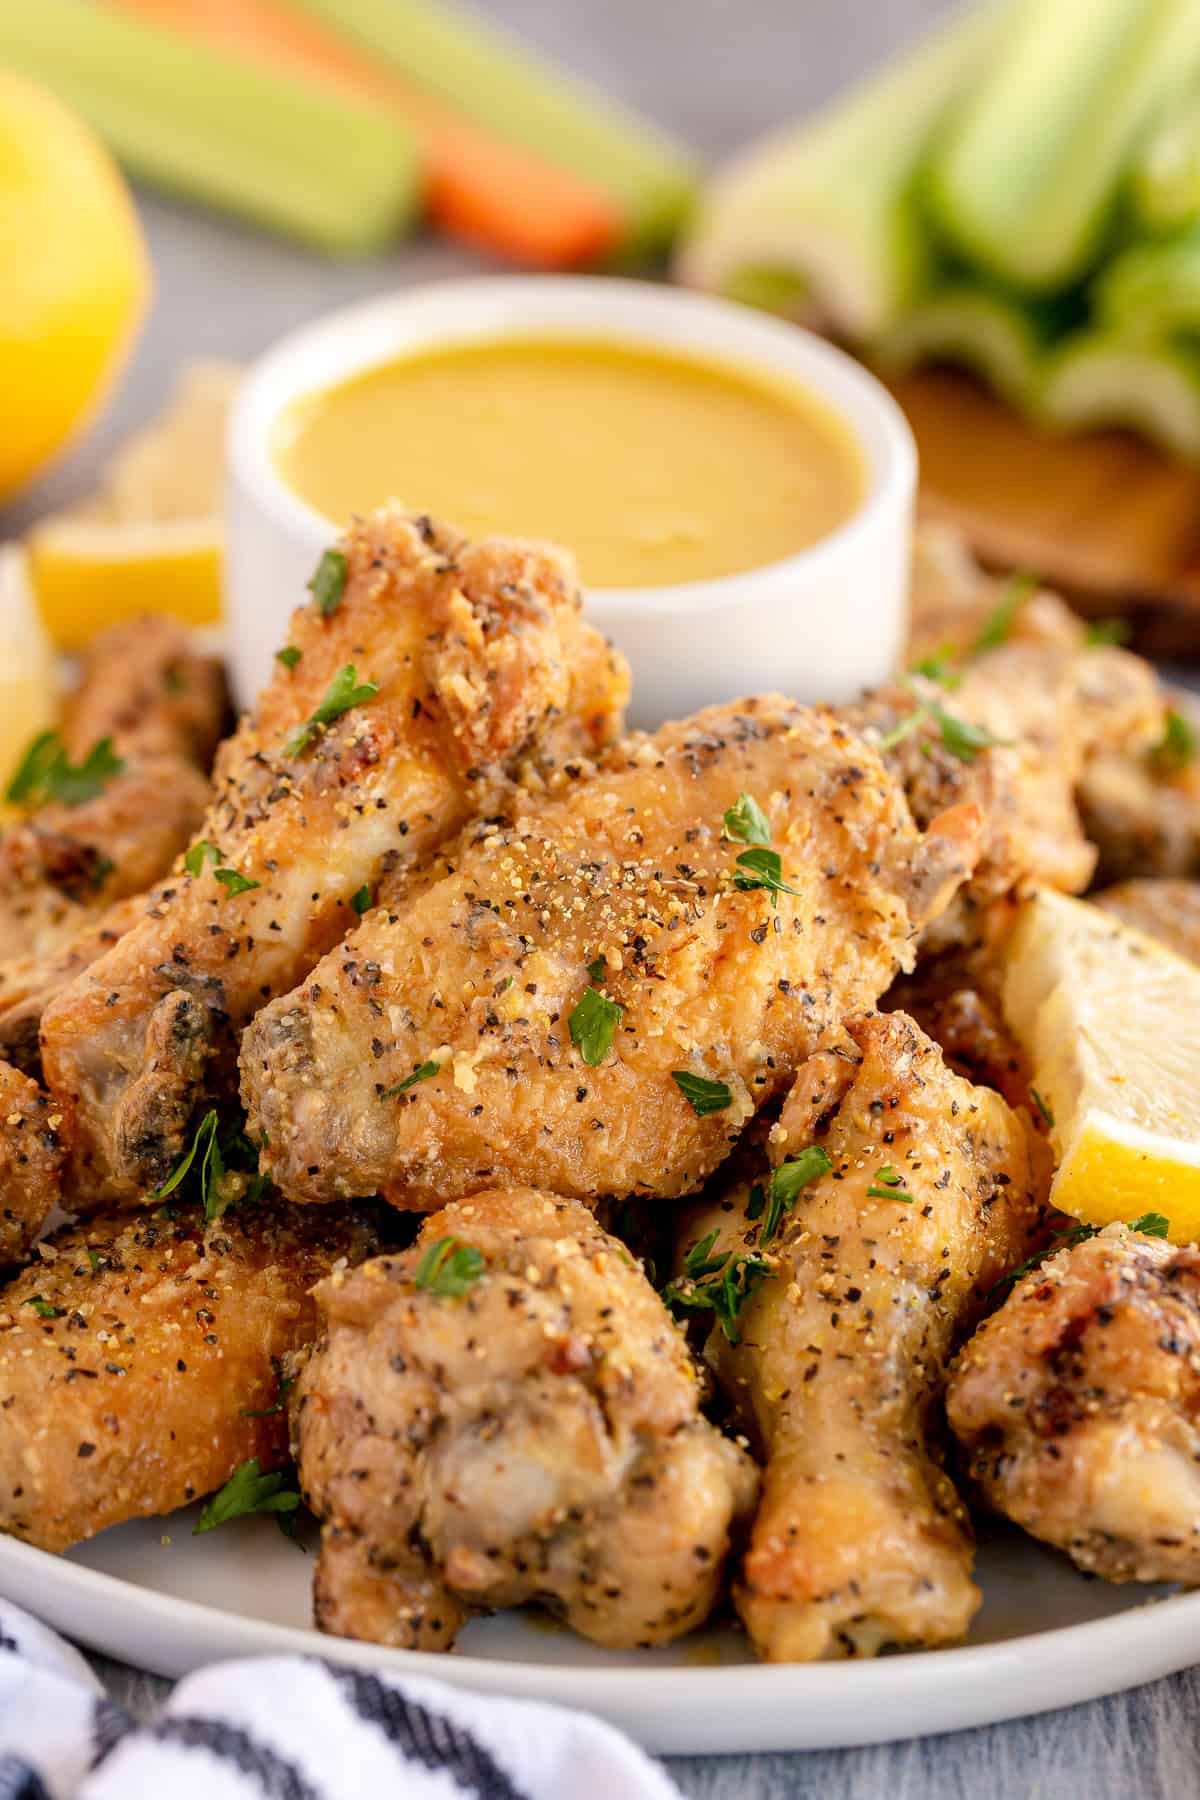 Lemon pepper wings on a white platter with mustard dipping sauce.